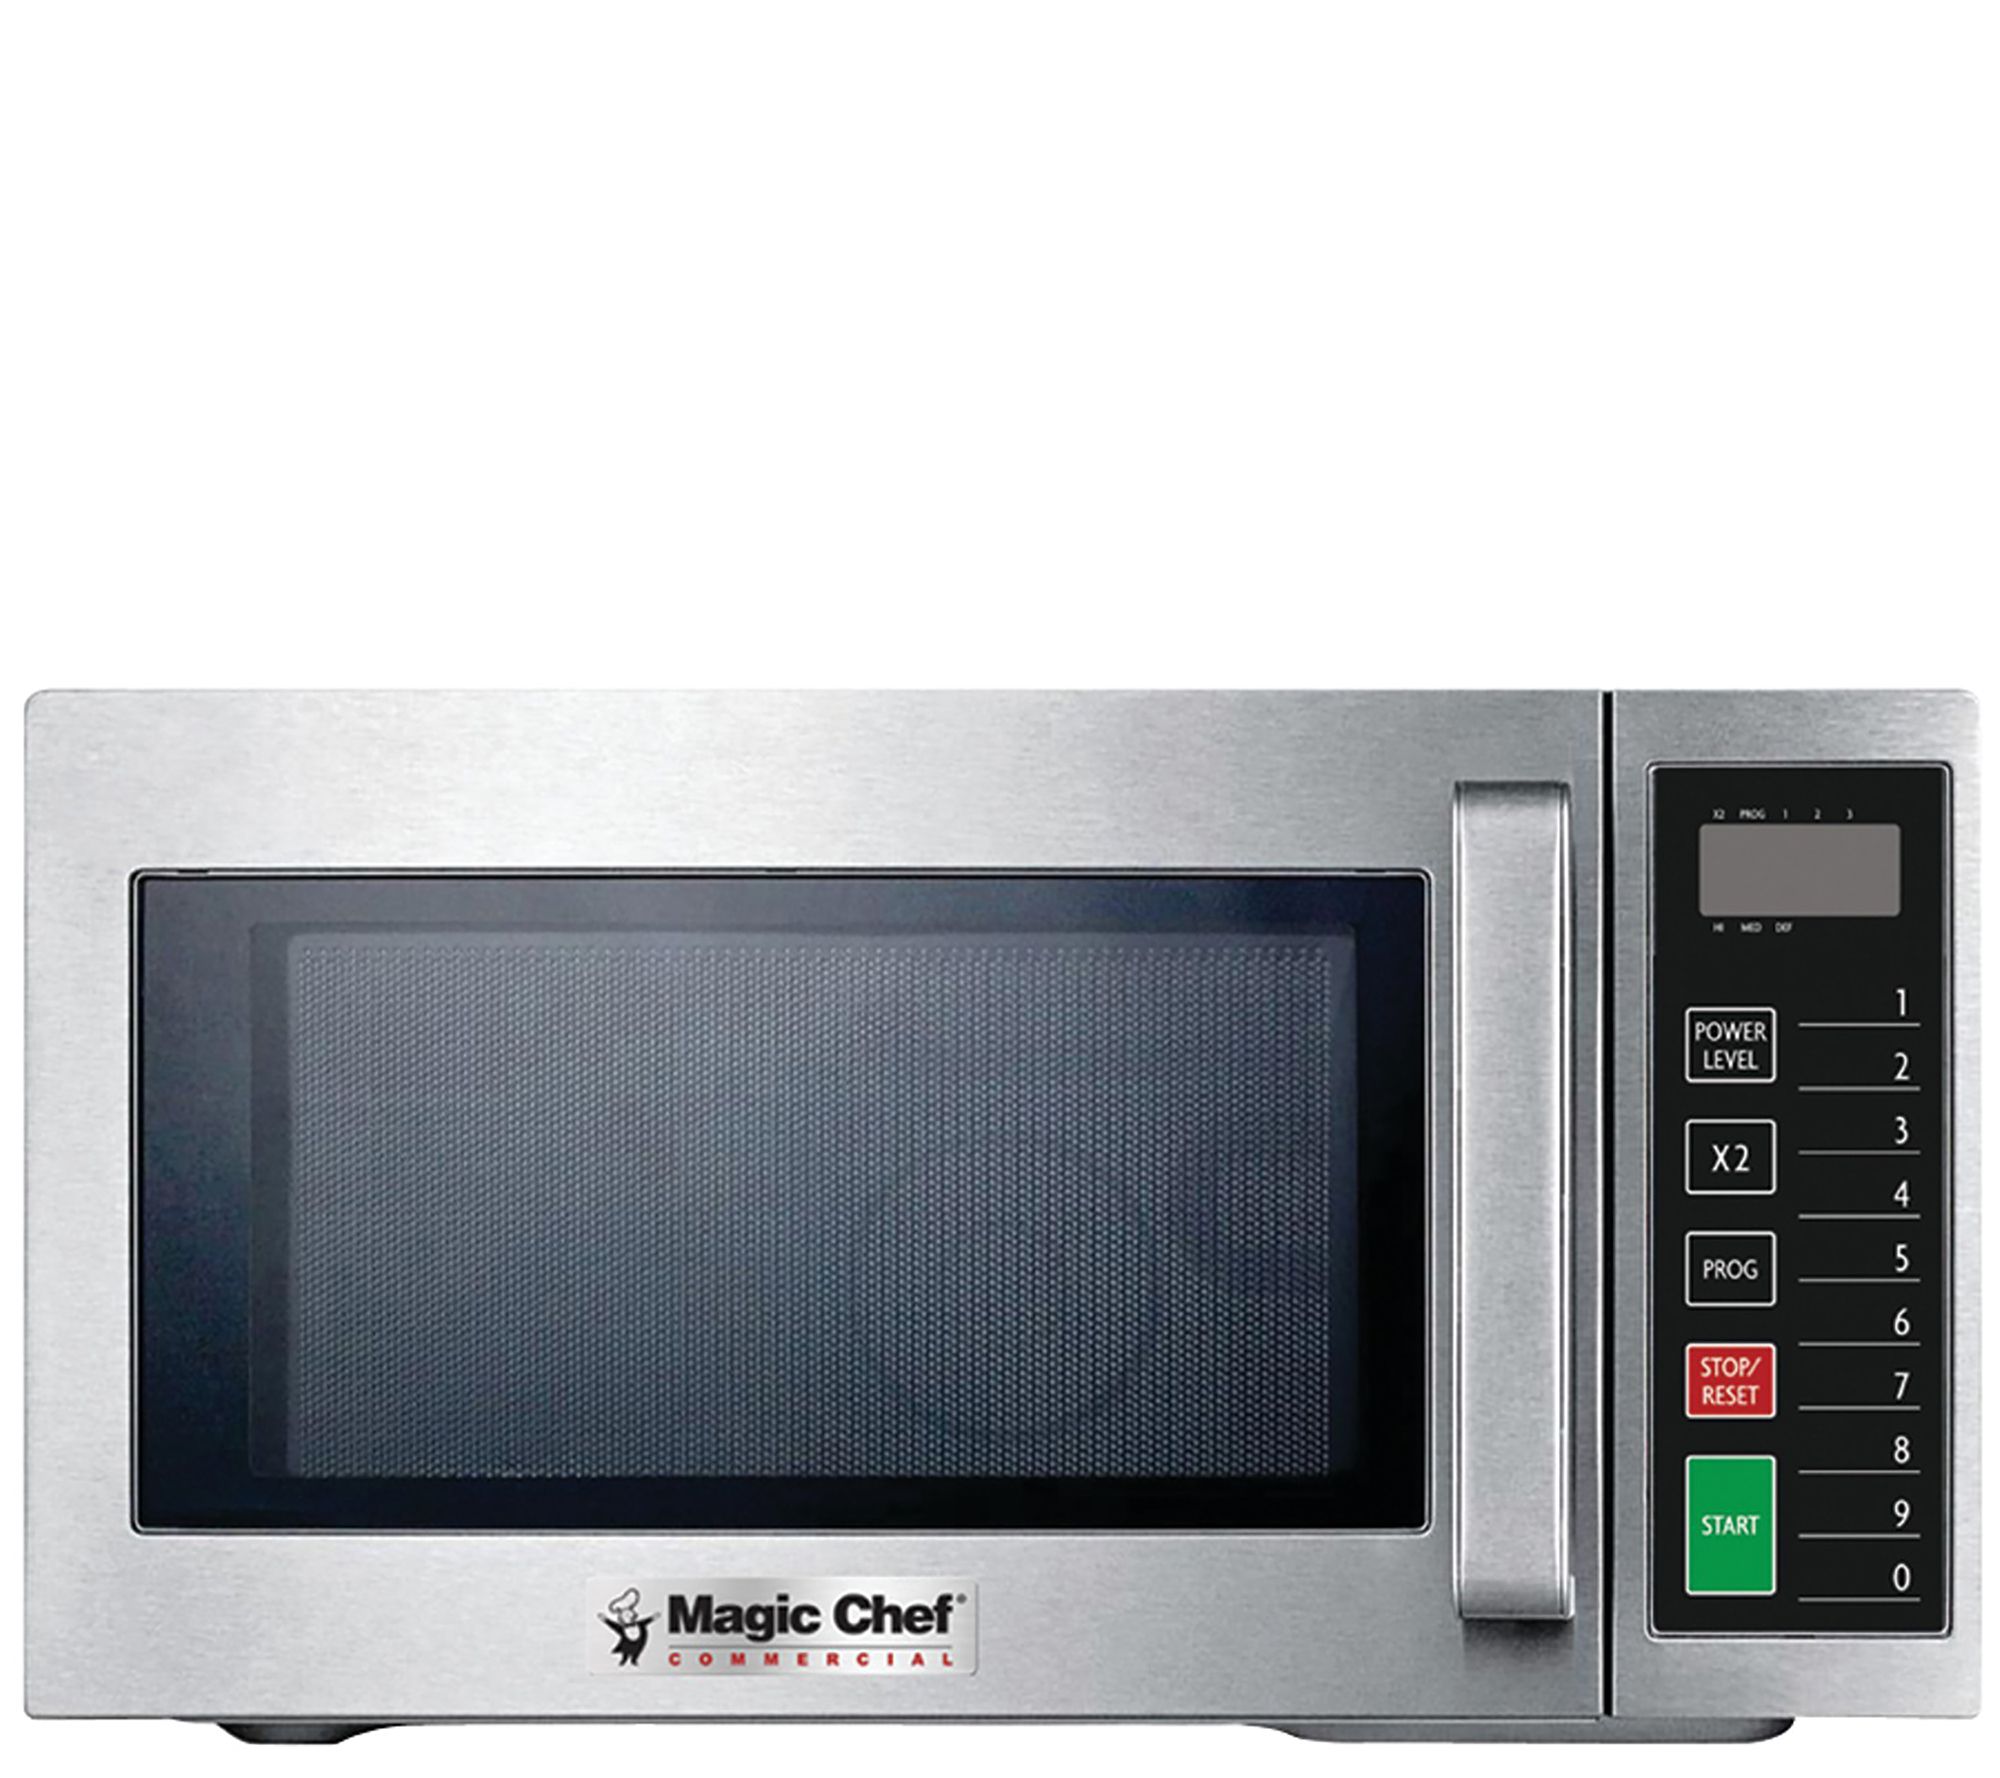 COMMERCIAL CHEF 1.6 Cubic Foot Microwave with 10 Power Levels